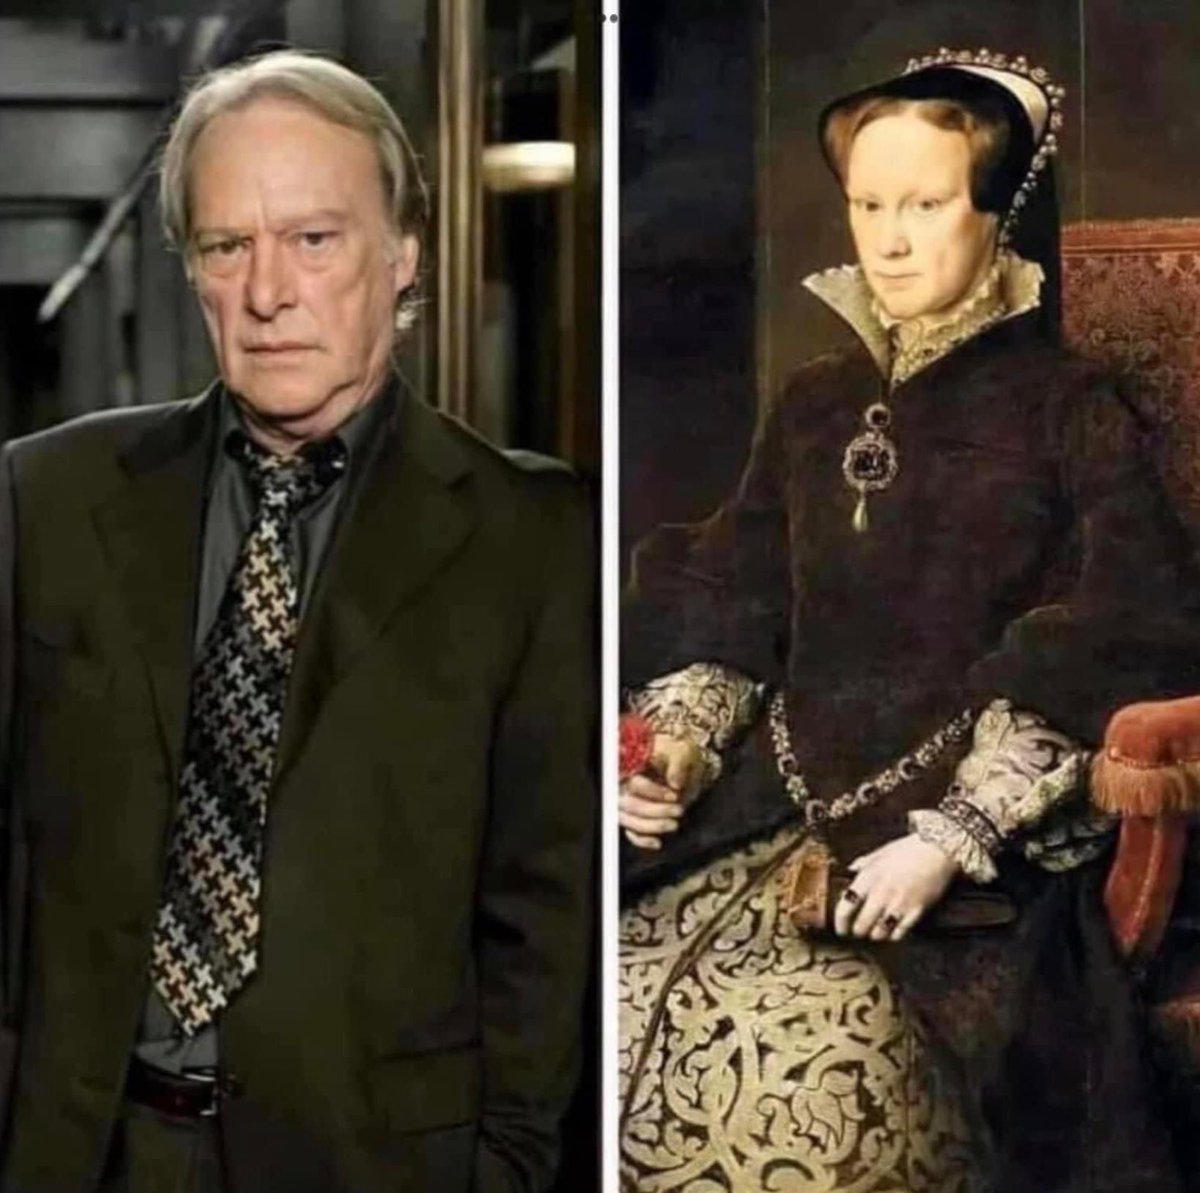 Has anyone ever seen Dennis Waterman and Mary Queen of Scott’s in the same room at the same time before?